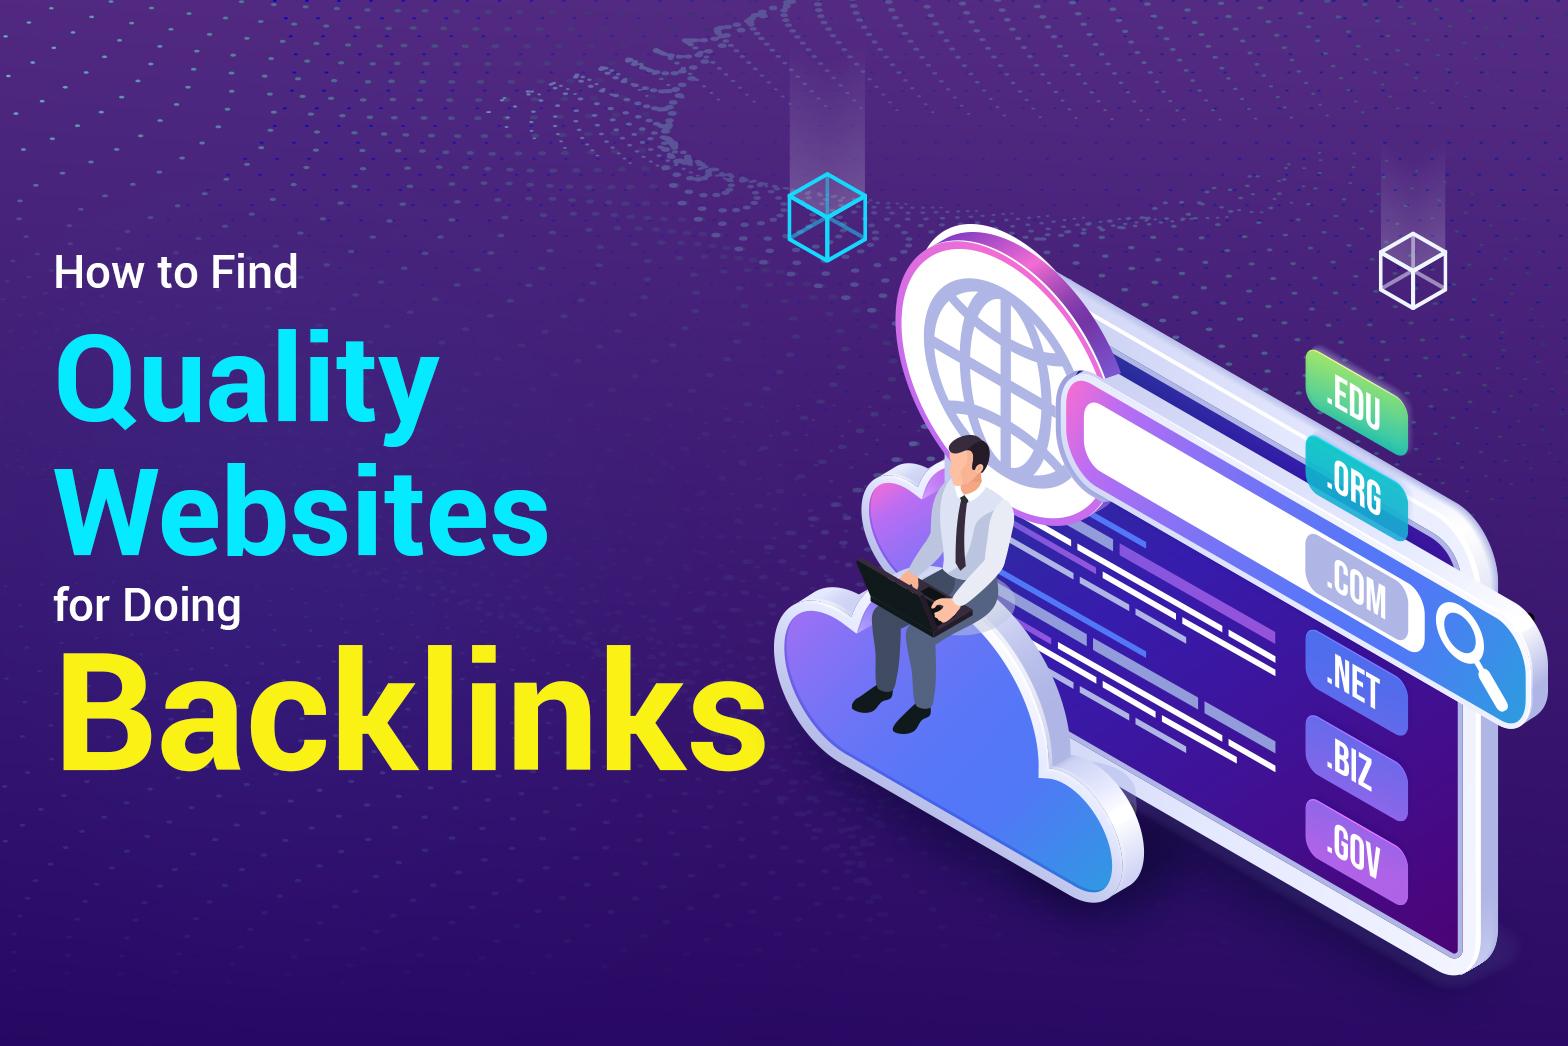 How to Find Quality Websites for Doing Backlinks